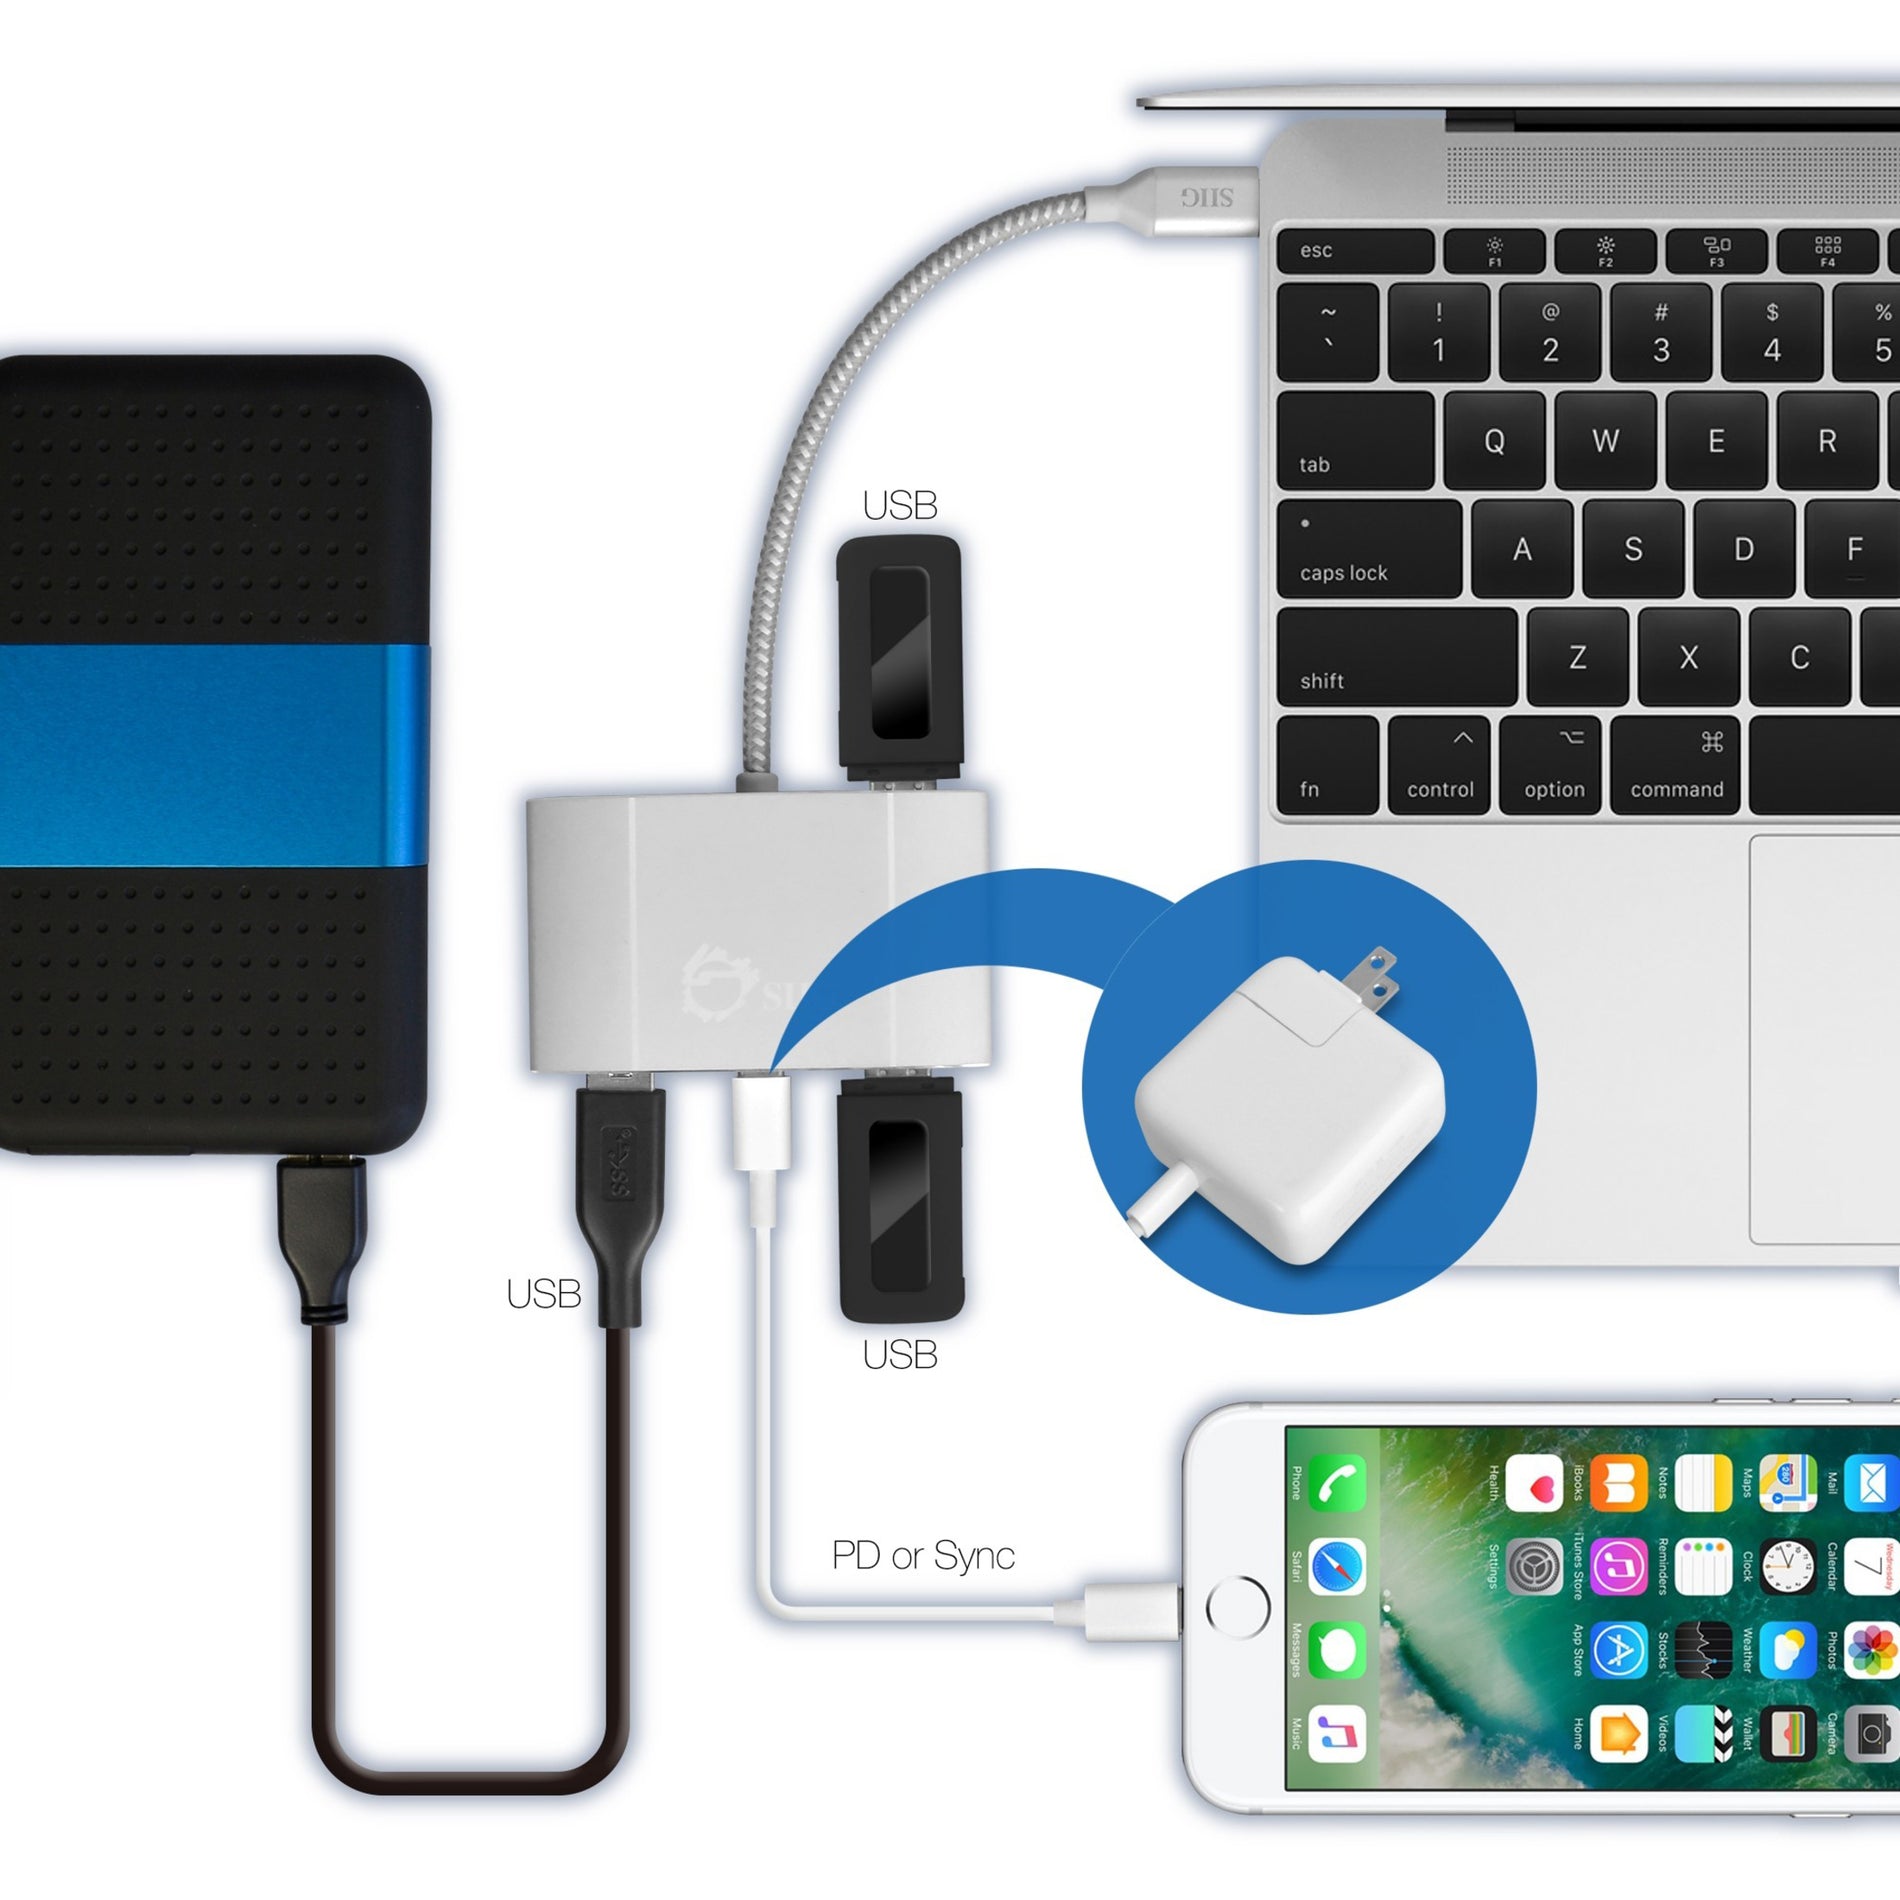 SIIG JU-H30C11-S1 USB-C to 4-Port USB 3.0 Hub with PD Charging - Increase Connectivity Options